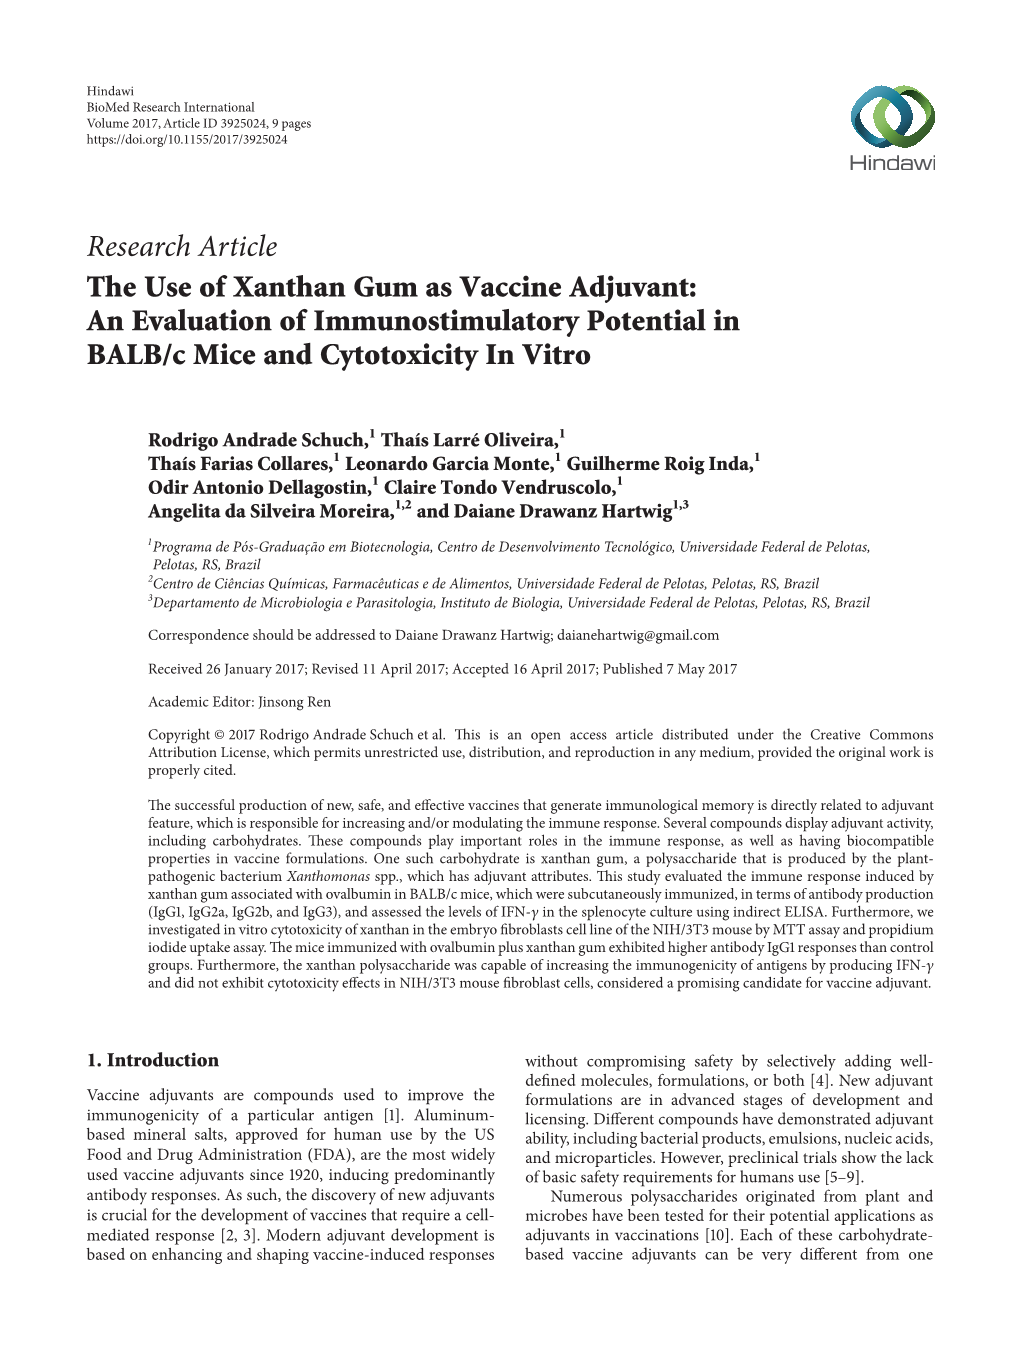 Research Article the Use of Xanthan Gum As Vaccine Adjuvant: an Evaluation of Immunostimulatory Potential in BALB/C Mice and Cytotoxicity in Vitro